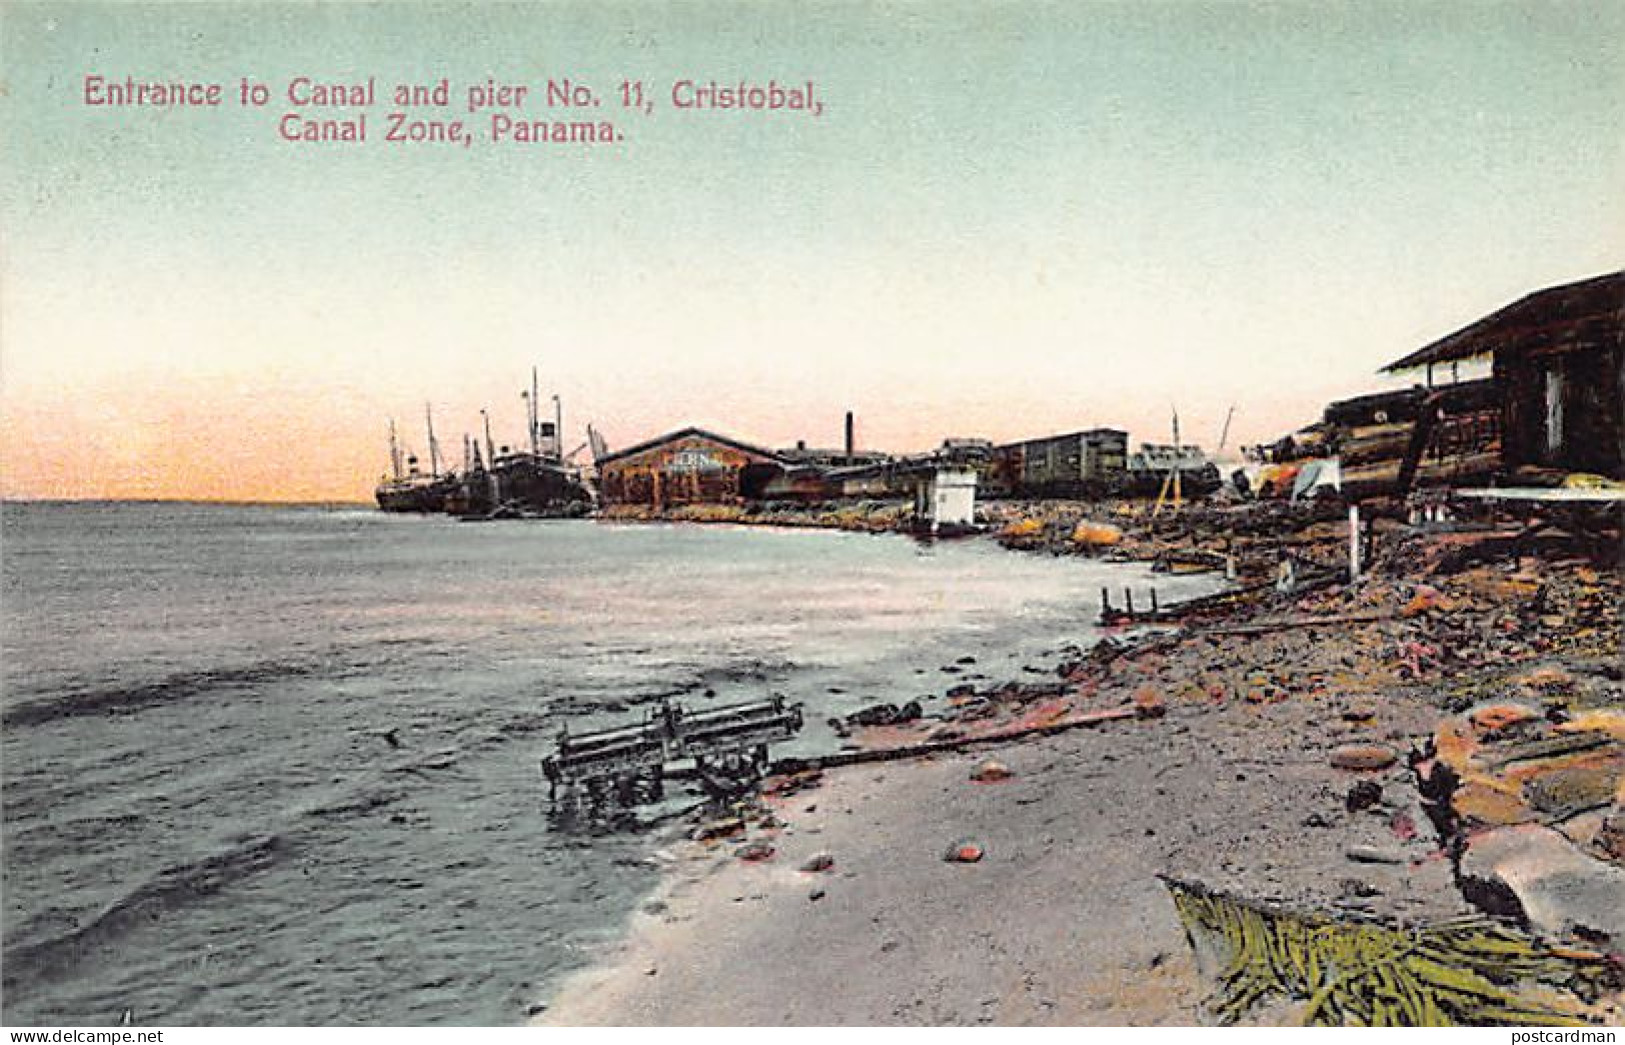 Canal De Panamá - Entrance To Canal And Pier No. 11, Cristobal - Publ. I. L. Maduro Jr. 74C - Panama